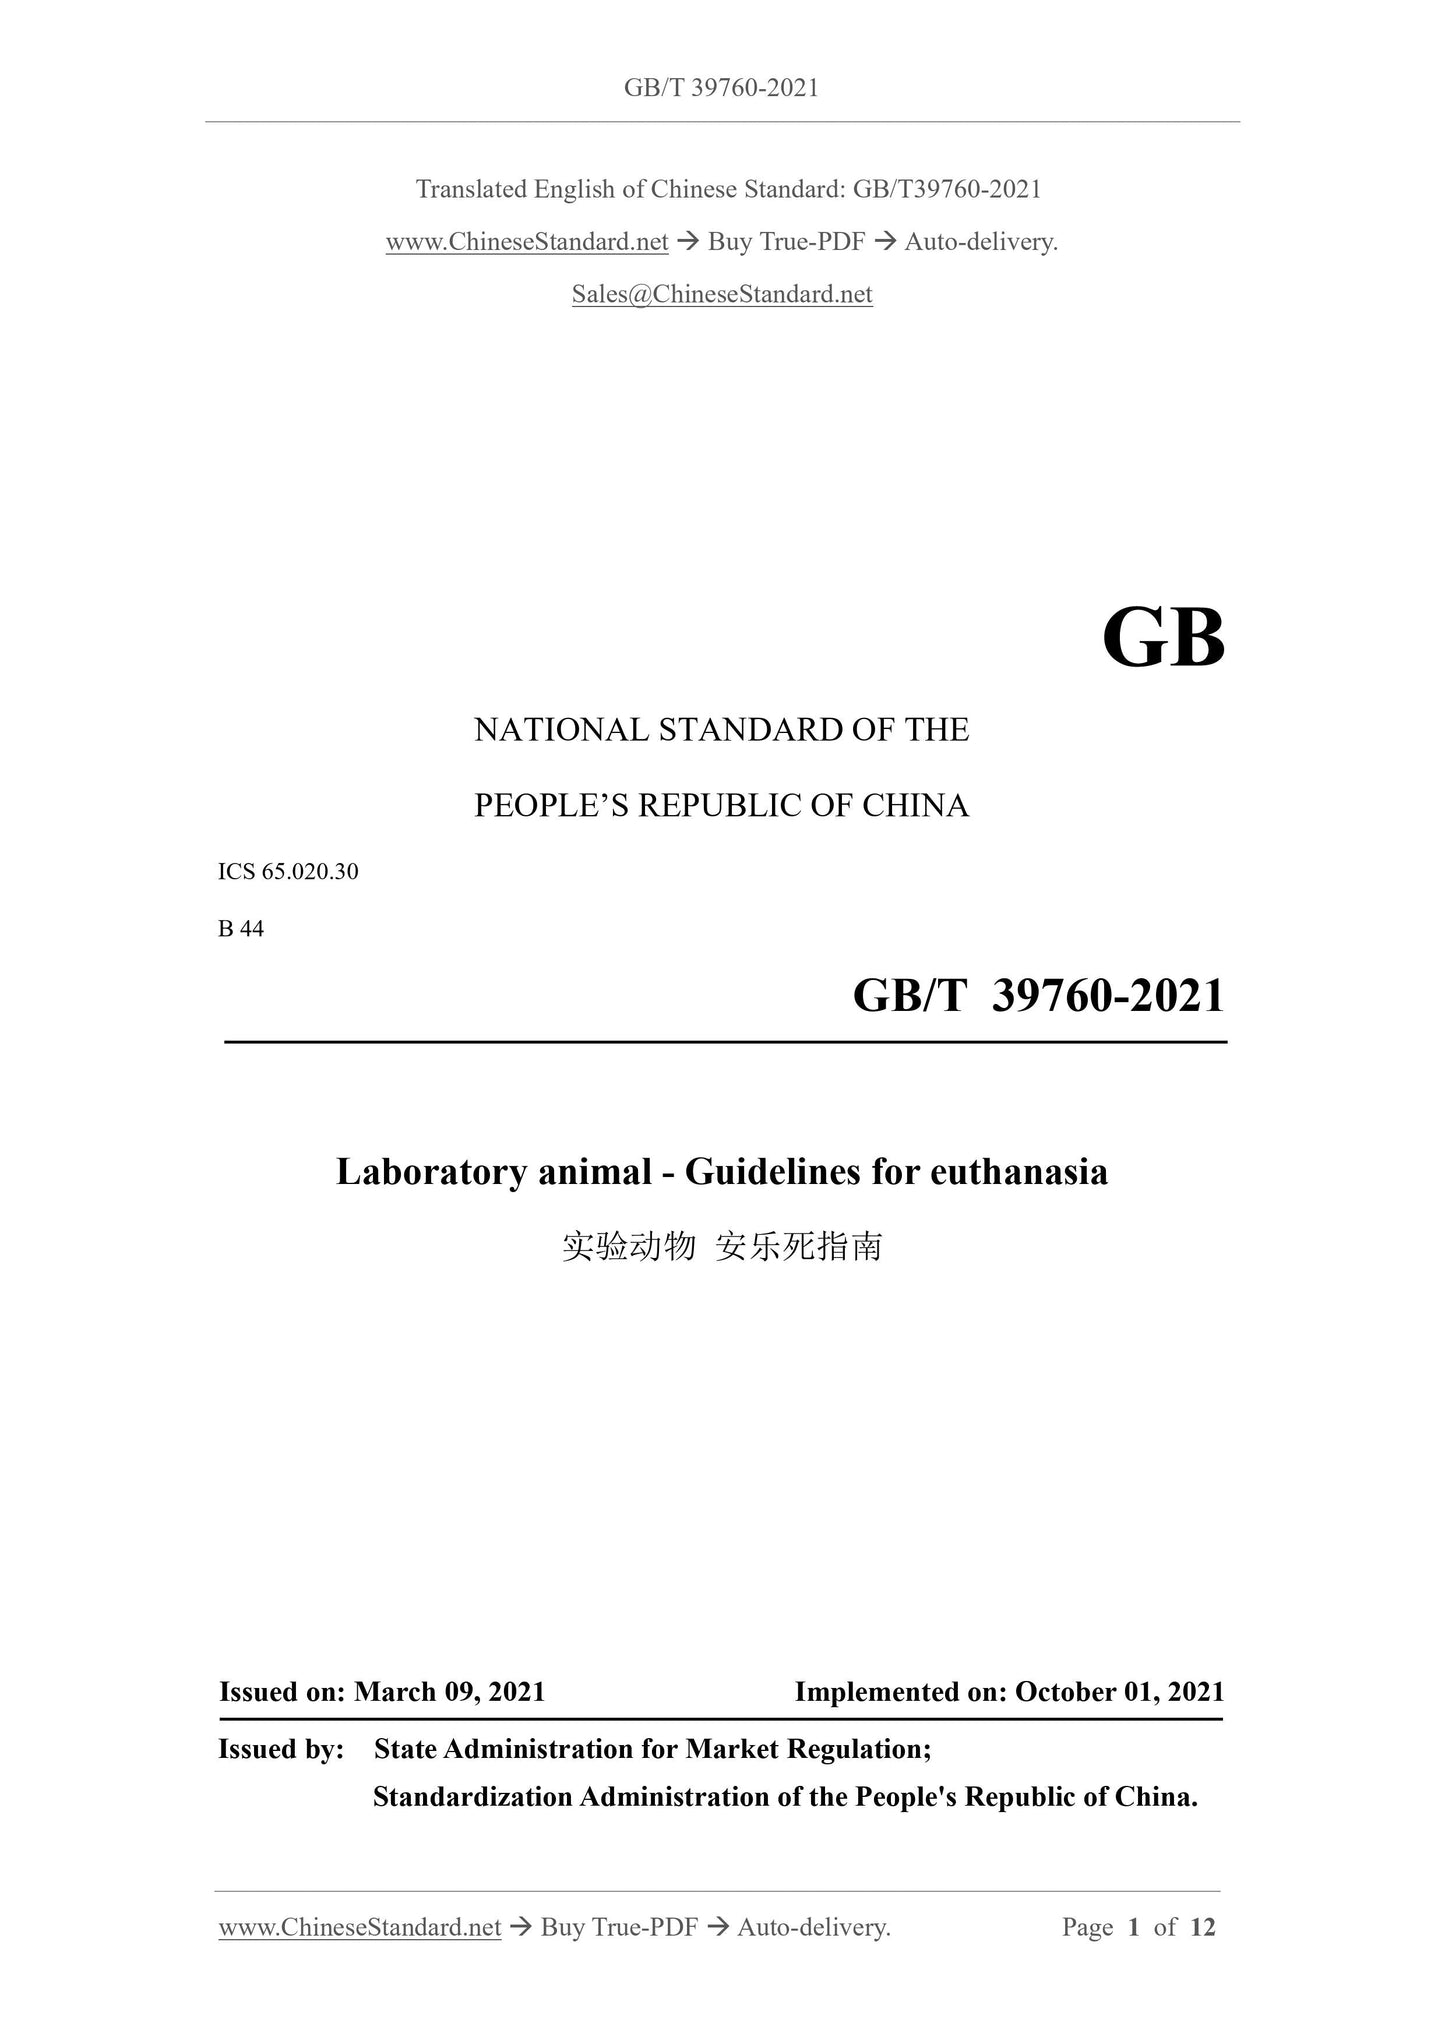 GB/T 39760-2021 Page 1